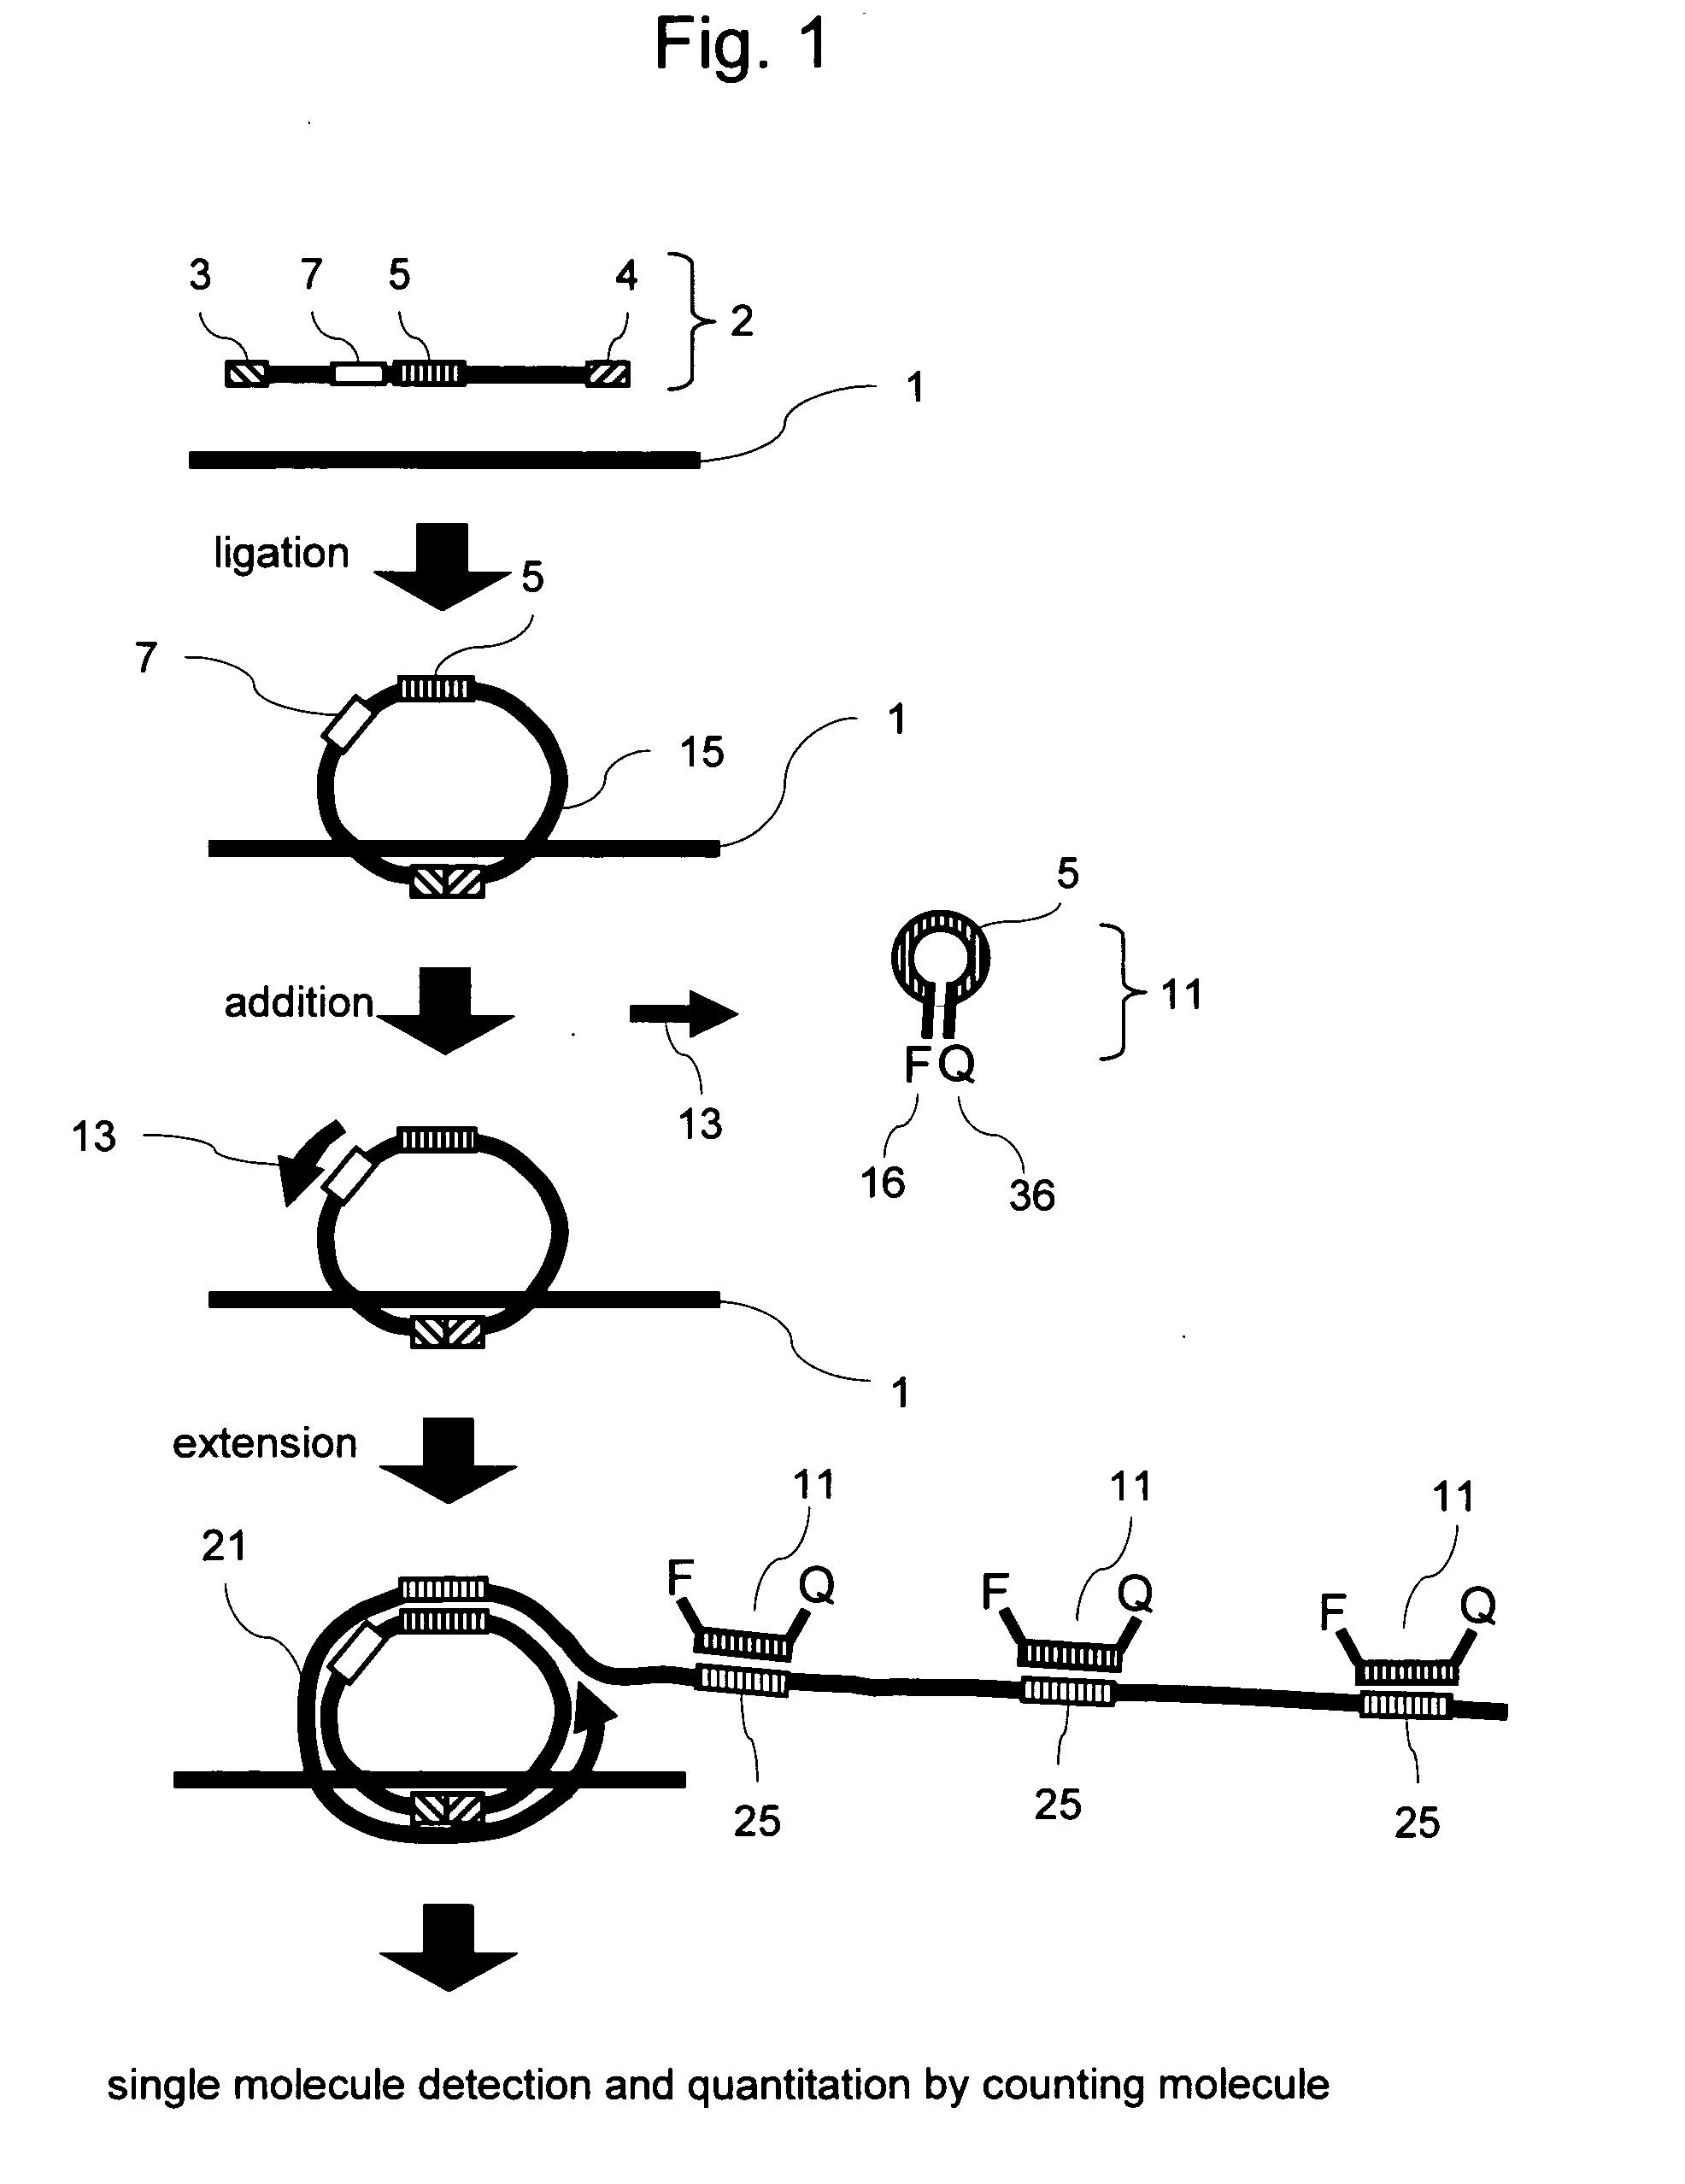 Methods of nucleic acid analysis by single molecule detection